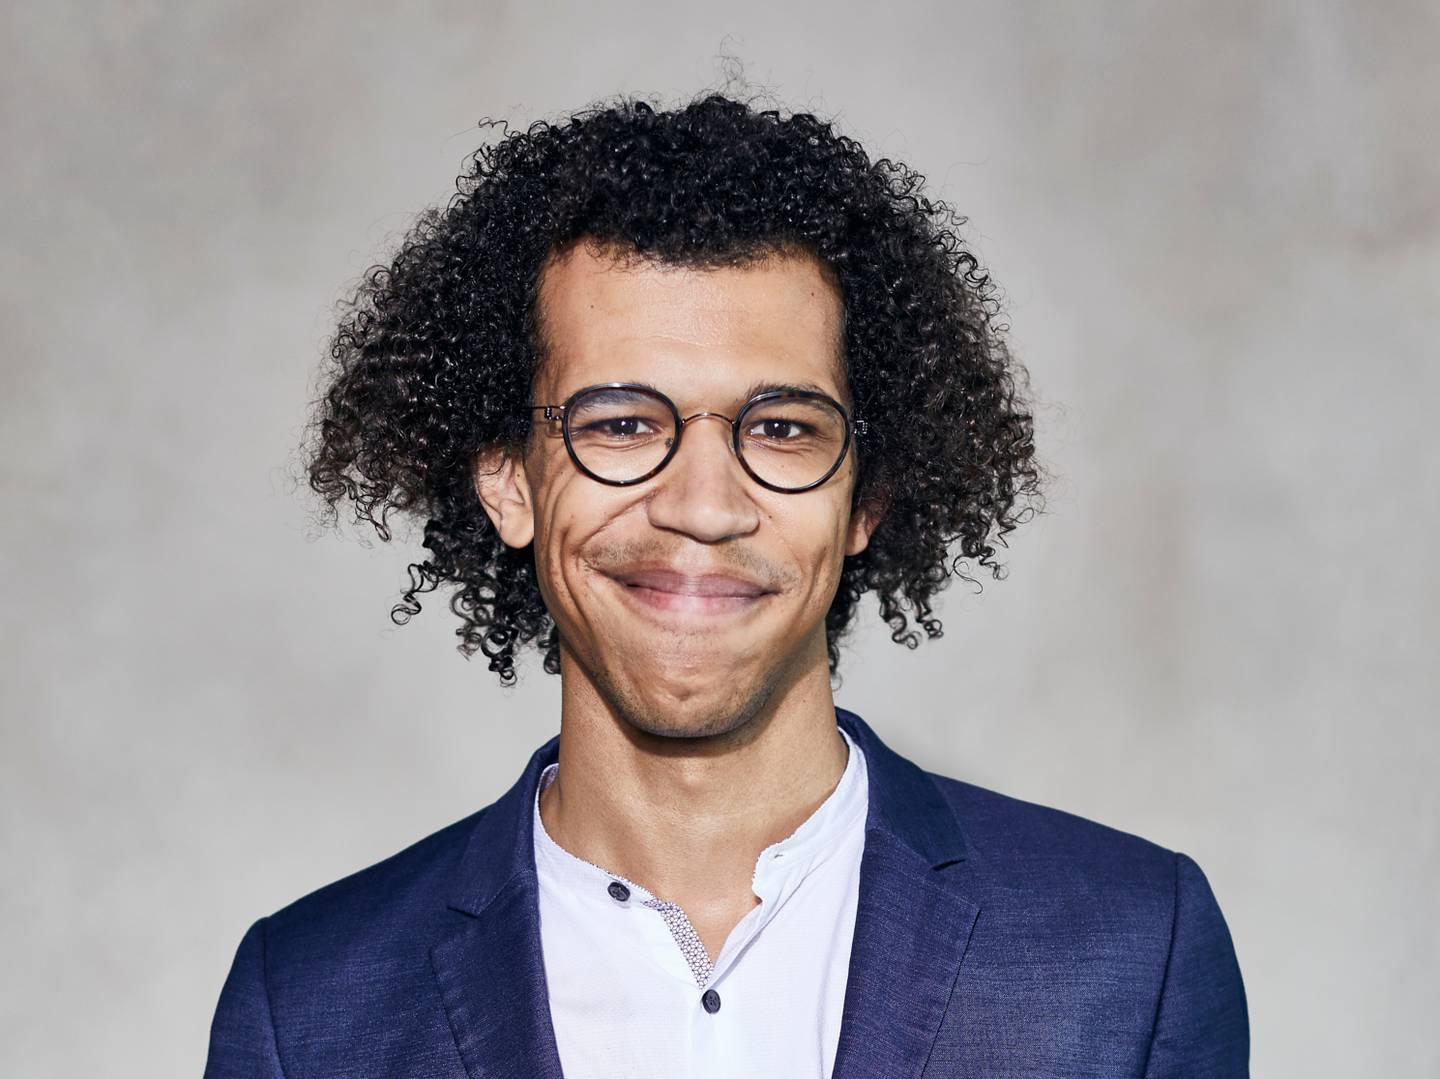 Jonathon Heyward, 29, will join the BSO as the Music Director Designate in 2022. He will begin a five year contract as Music Director beginning in 2023.